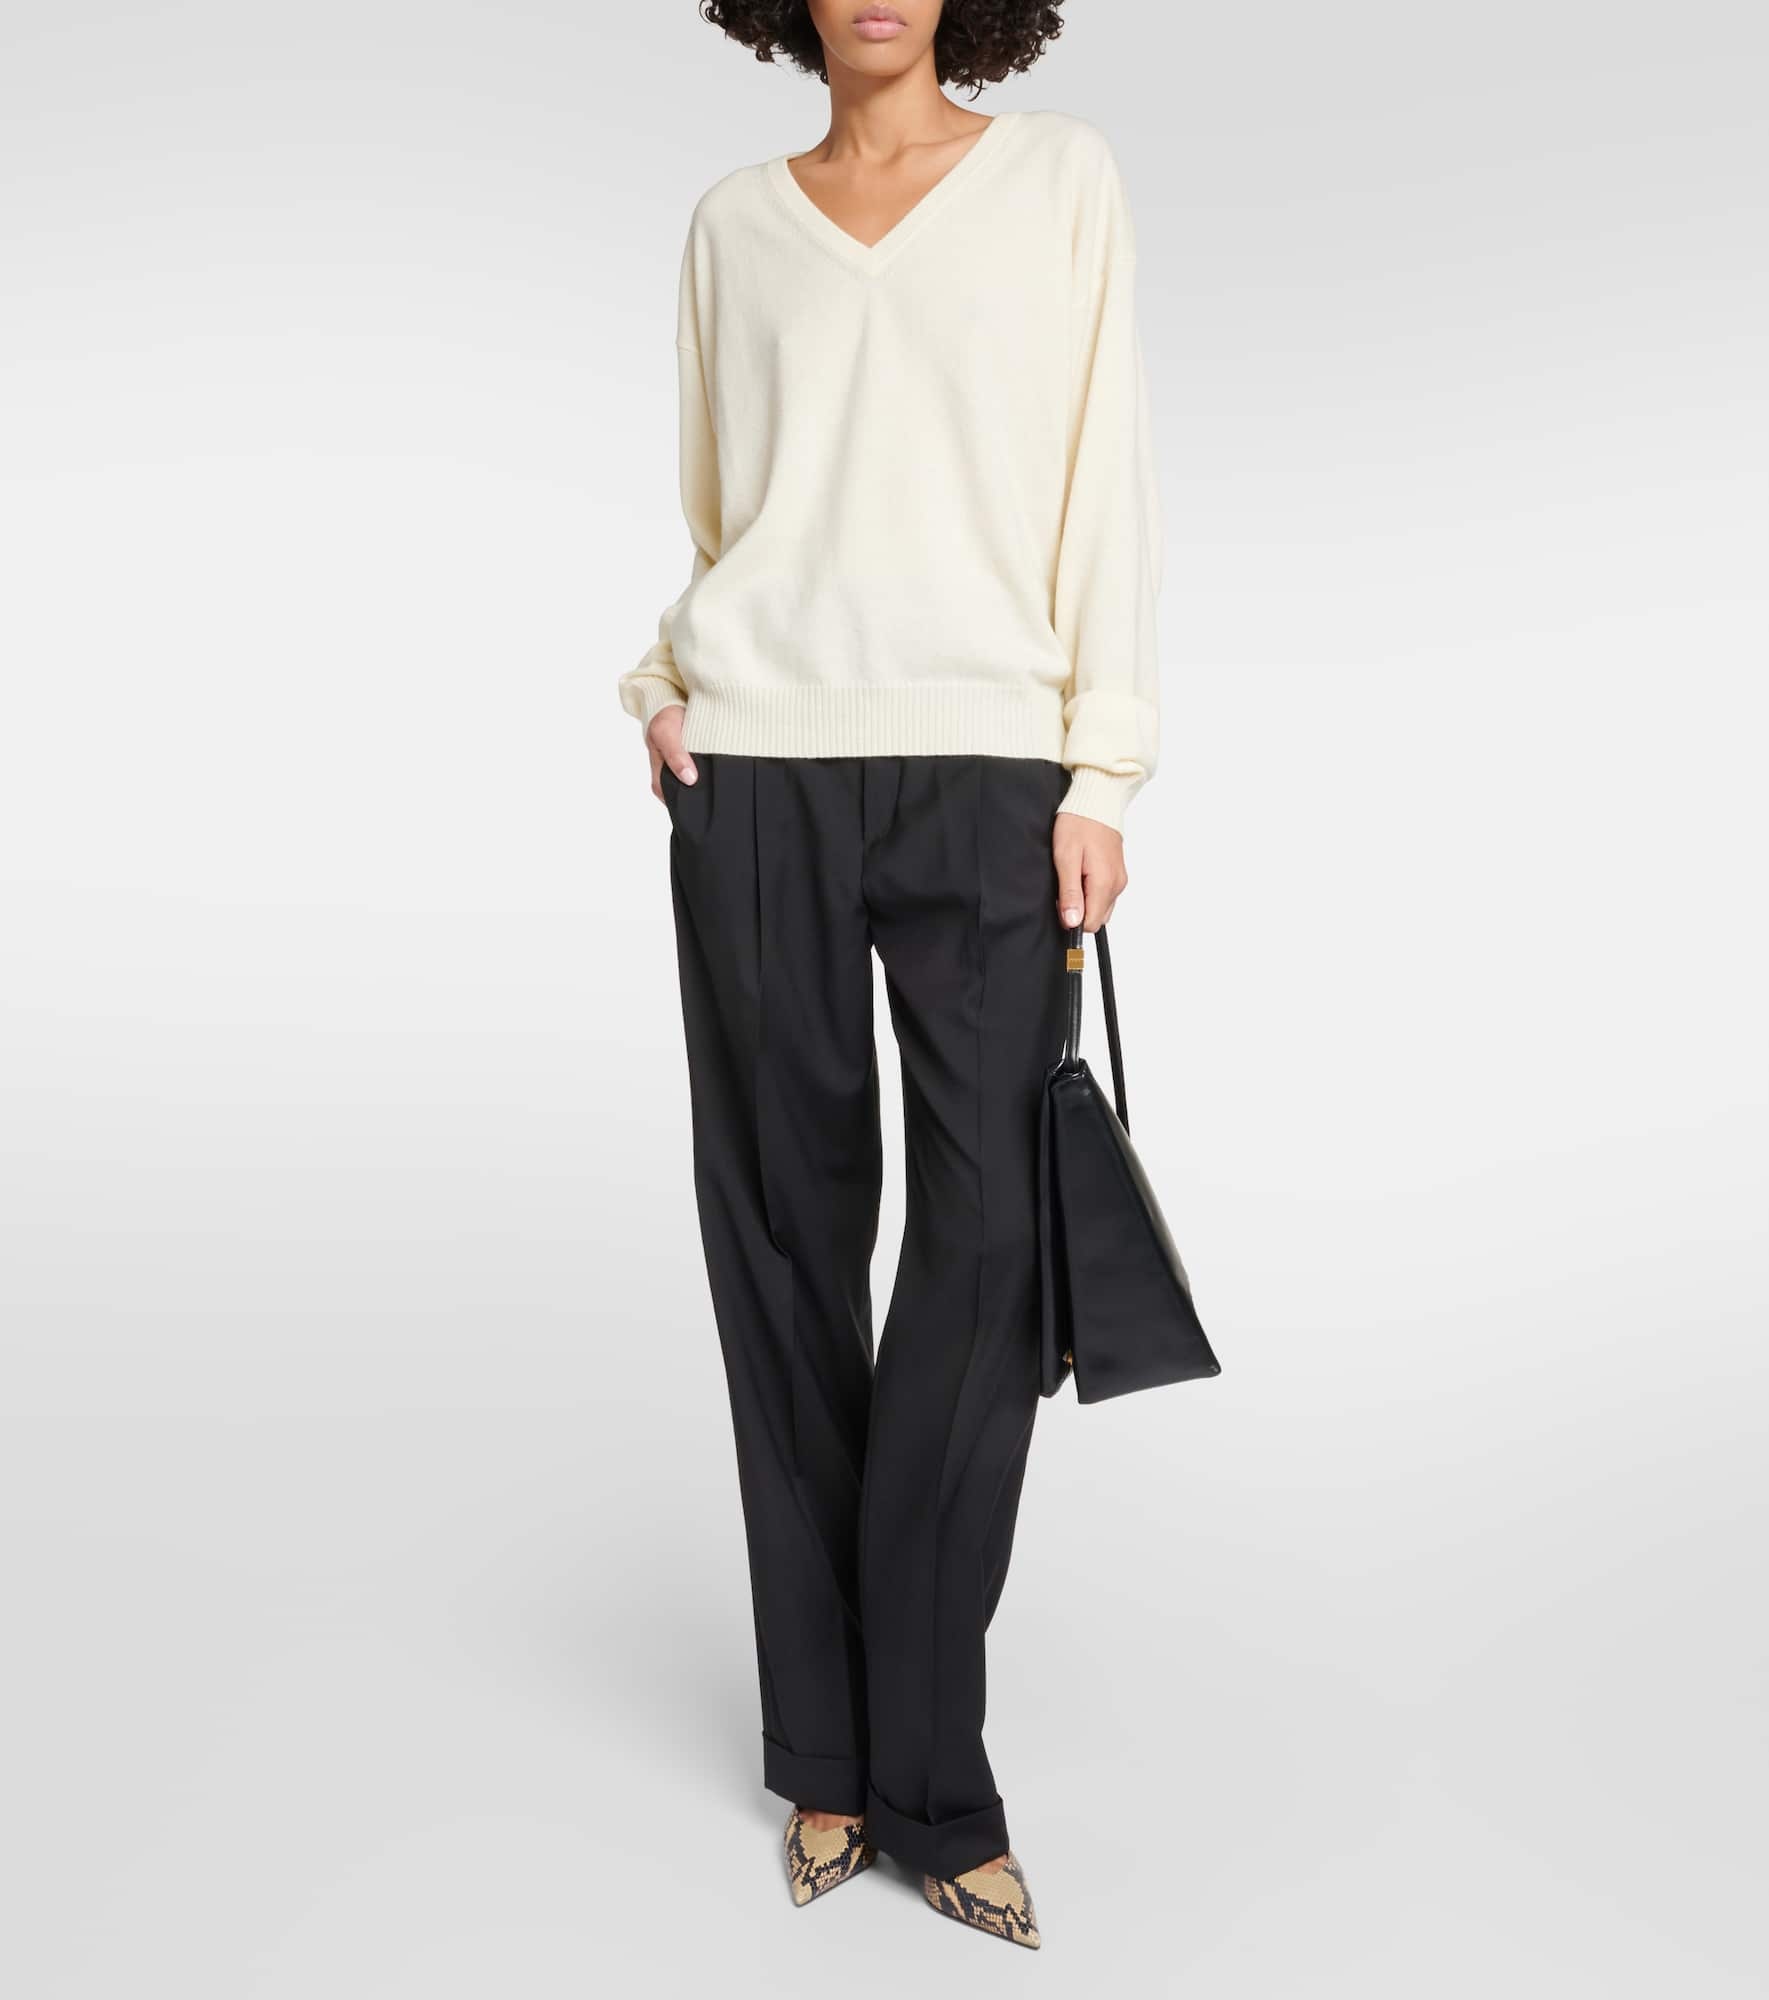 Etruria wool and cashmere sweater - 2